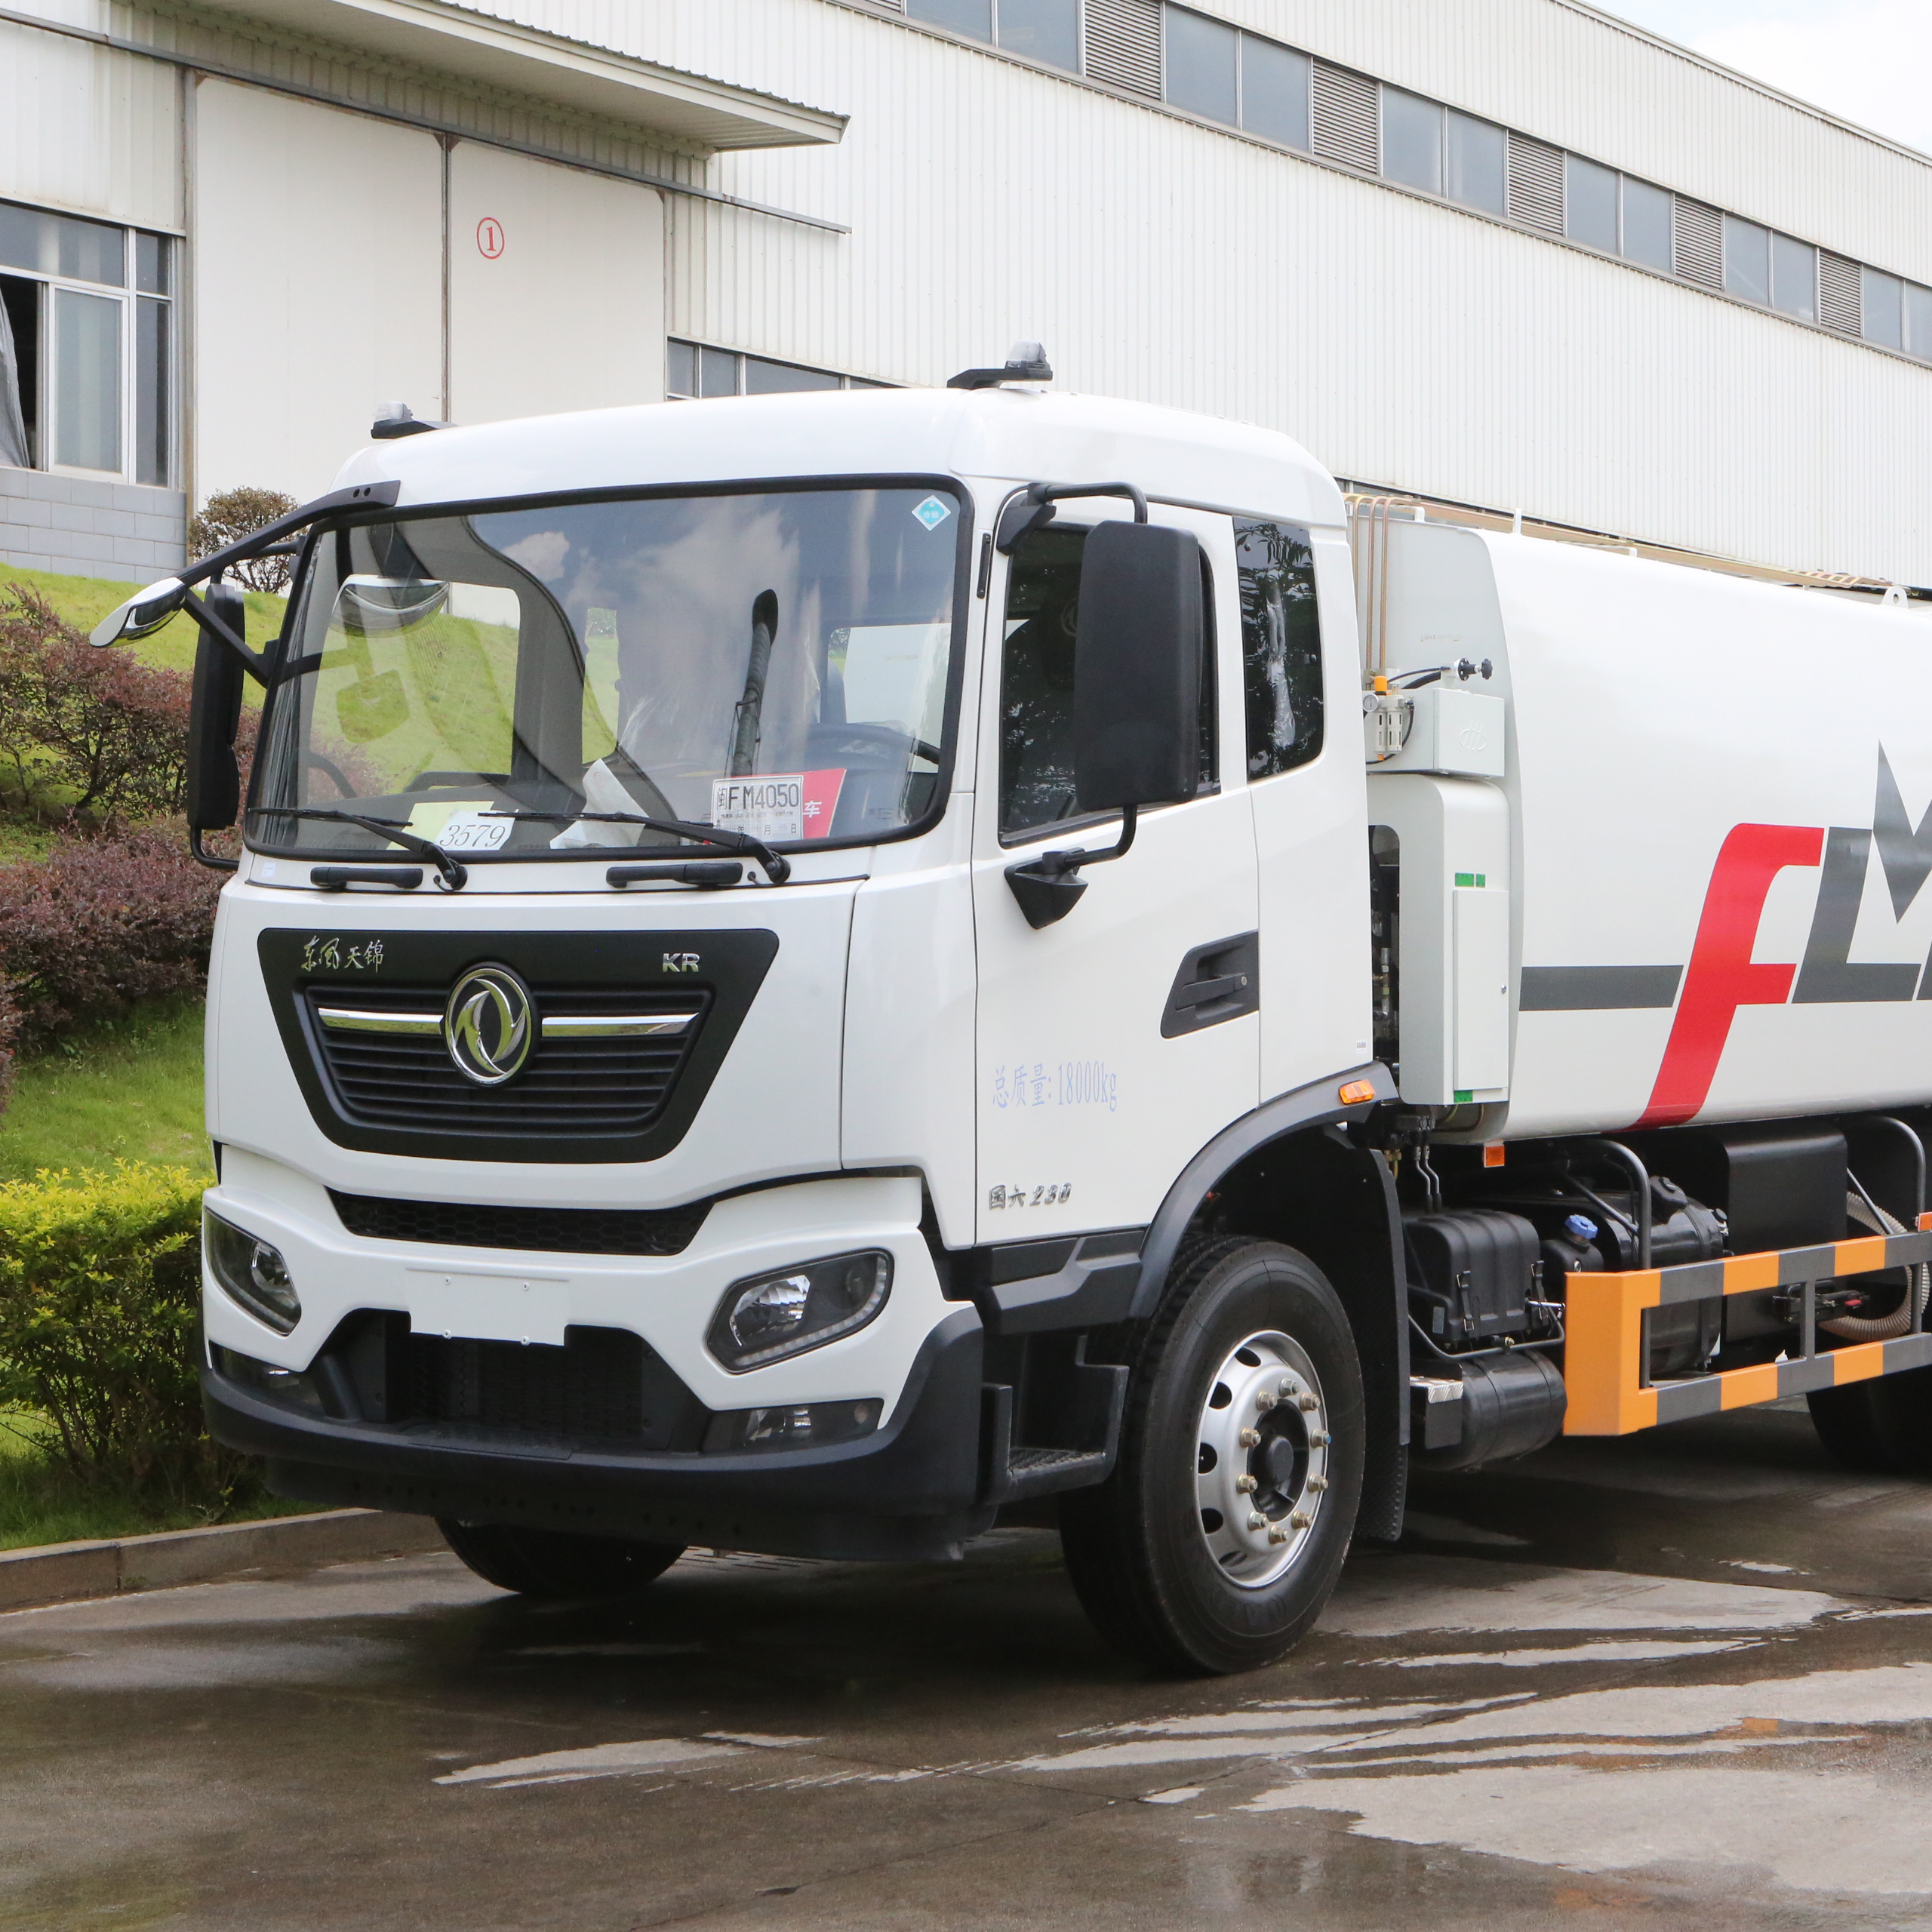 FULONGMA high configuration 18-ton compression garbage truck, with good performance and durability